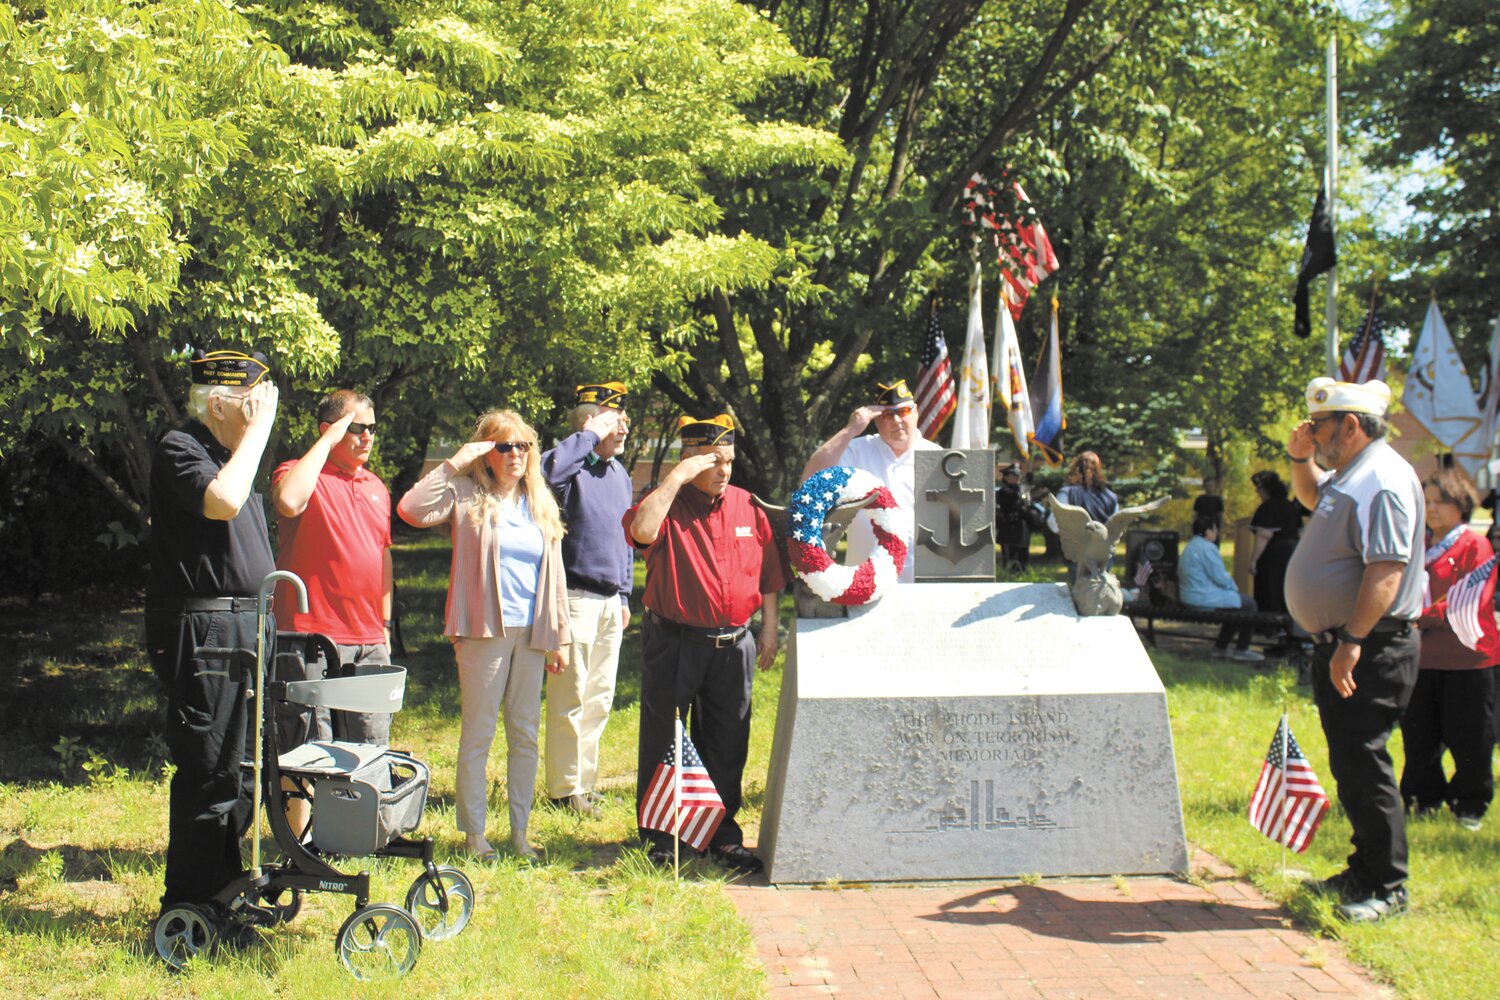 PLACING OF THE WREATH: Members of Chapter 9 of the Rhode Island Disabled American War Veterans placed a wreath on the stone at the entrance to Veterans Park on West Shore Road.